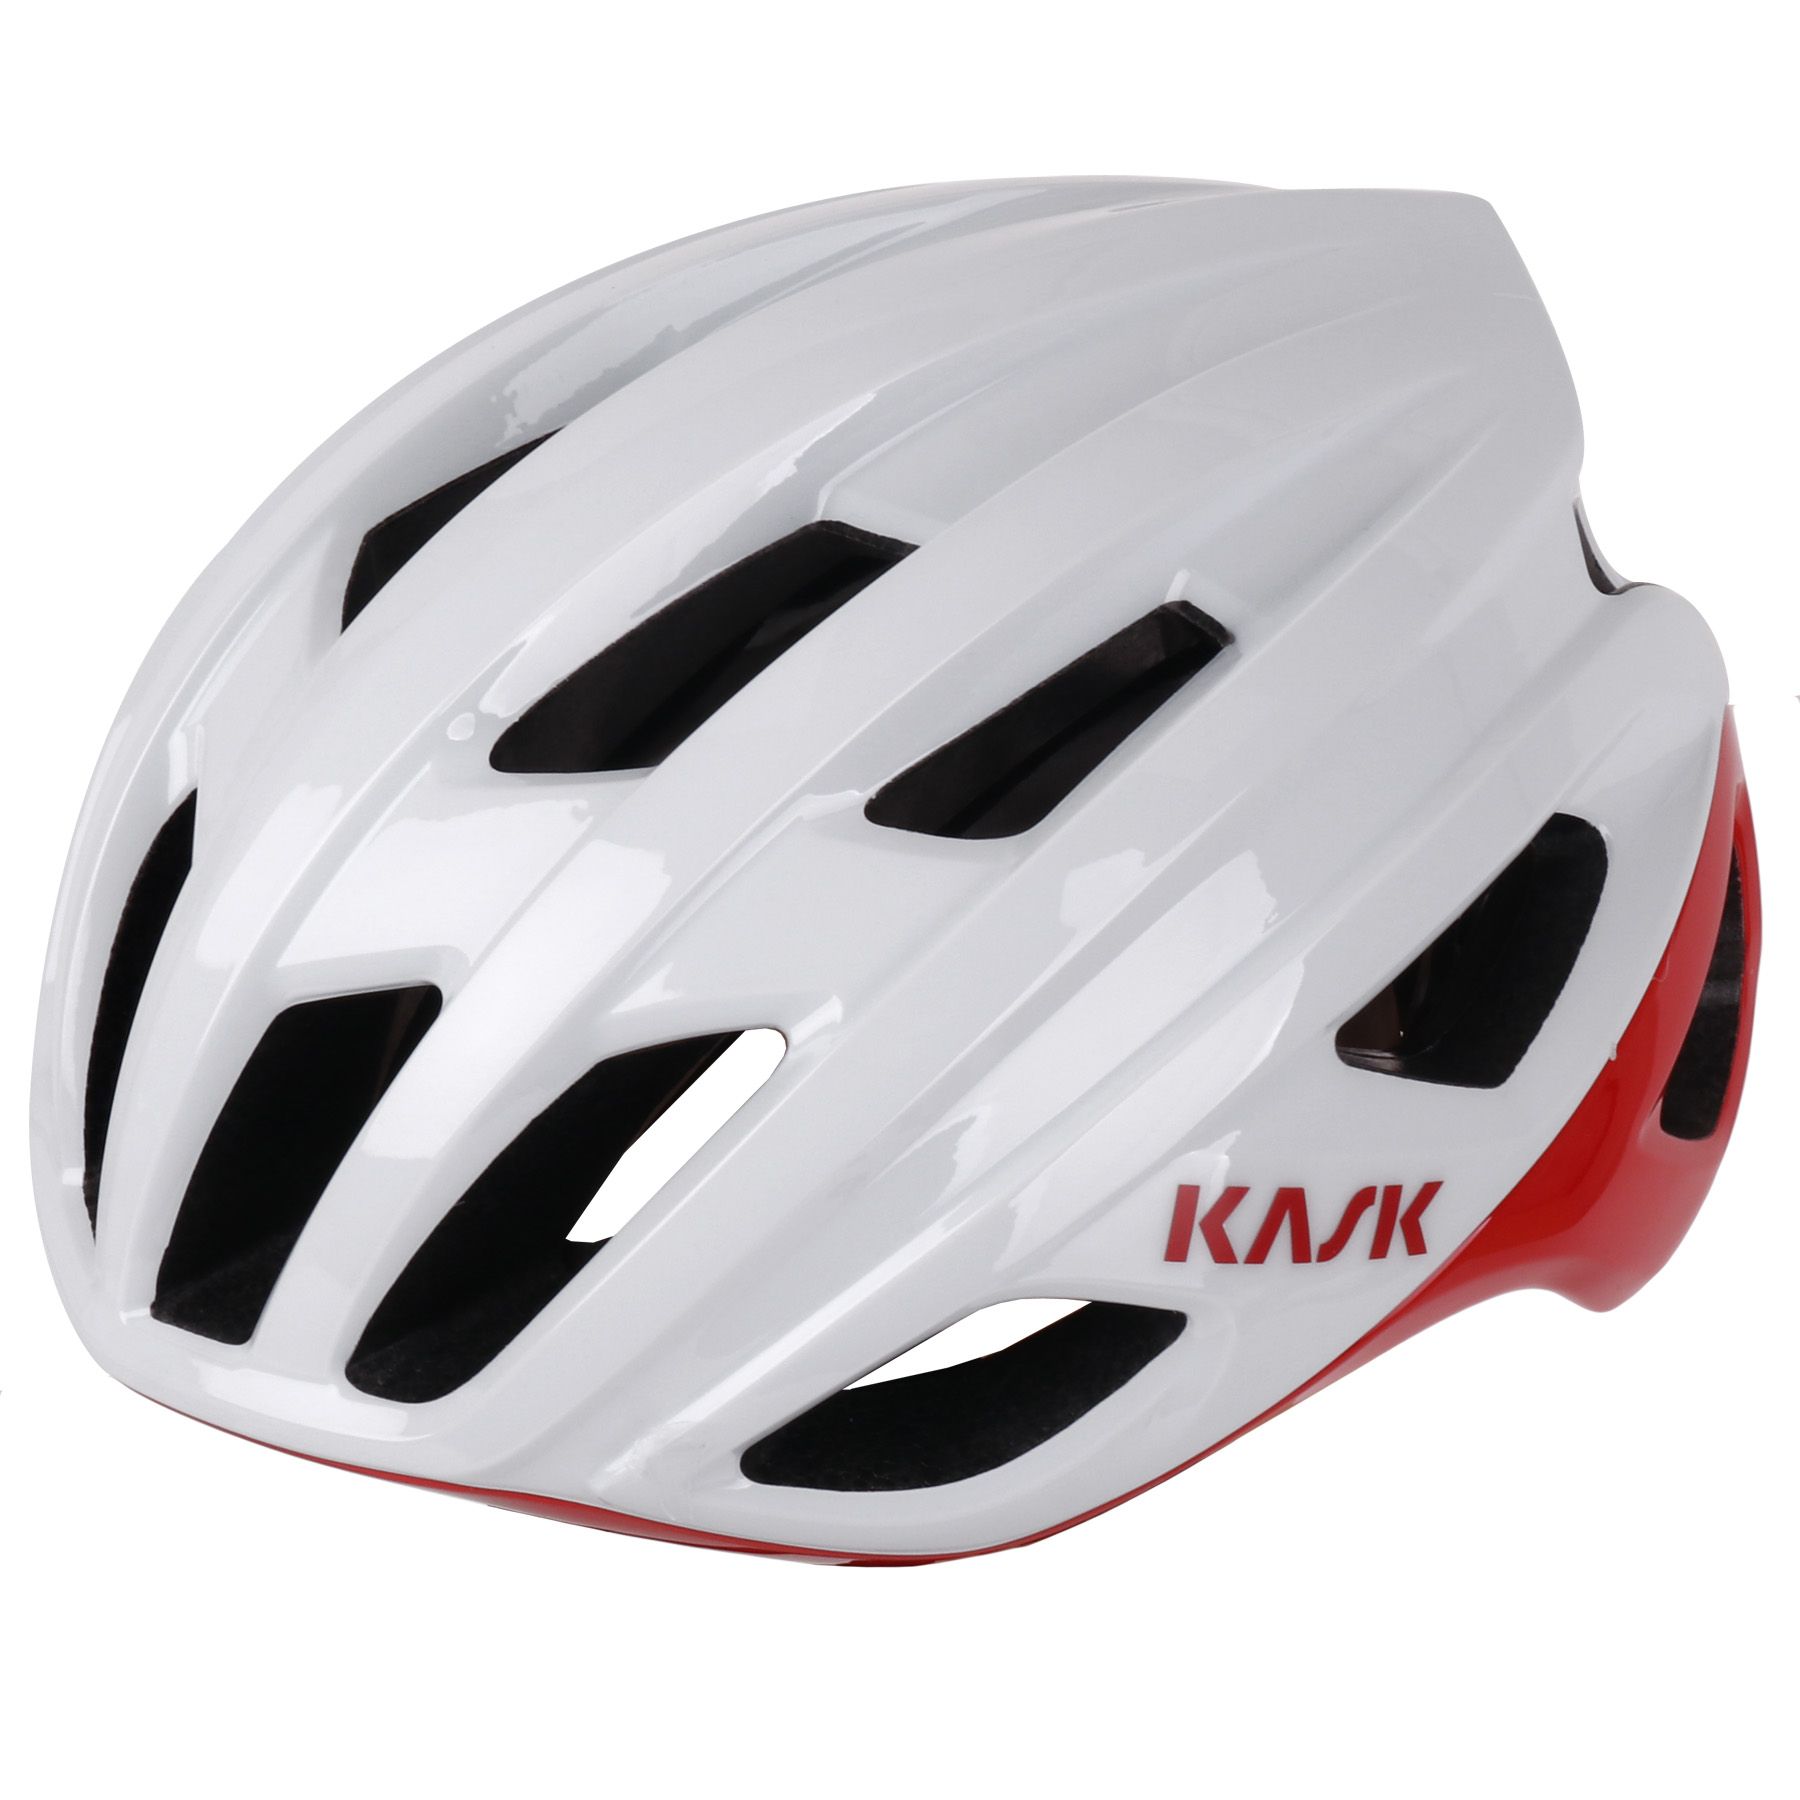 Picture of KASK Mojito³ WG11 Road Helmet - Bicolor White/Red